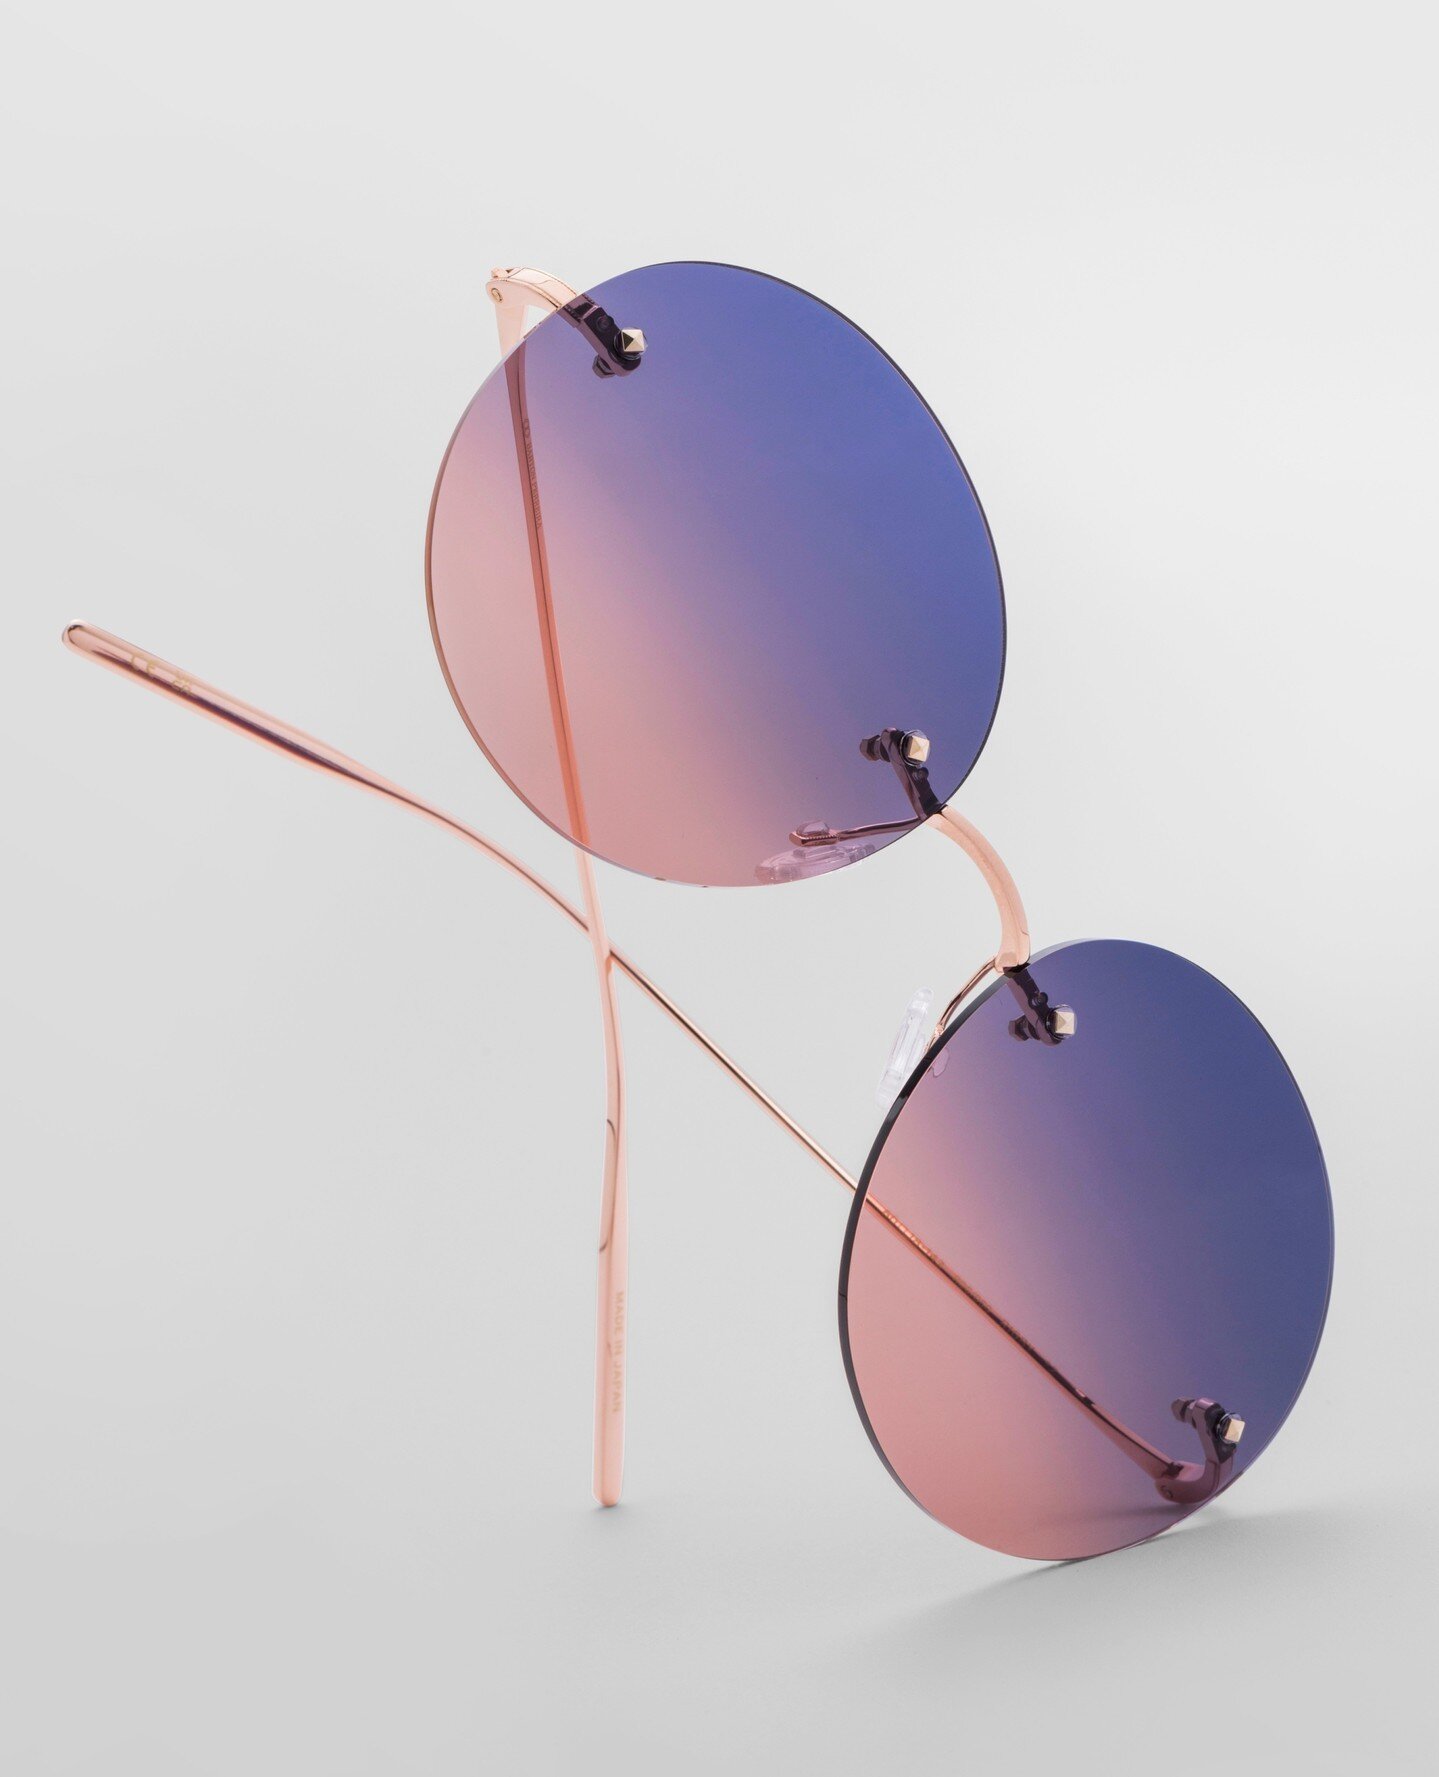 Elevate your style to dreamlike heights in the Dusk Sunset Gradient colorway.⁠
⁠
⁠
#BartonPerreira ⁠
#Sunglasses⁠
#SS24⁠
#TheRigby